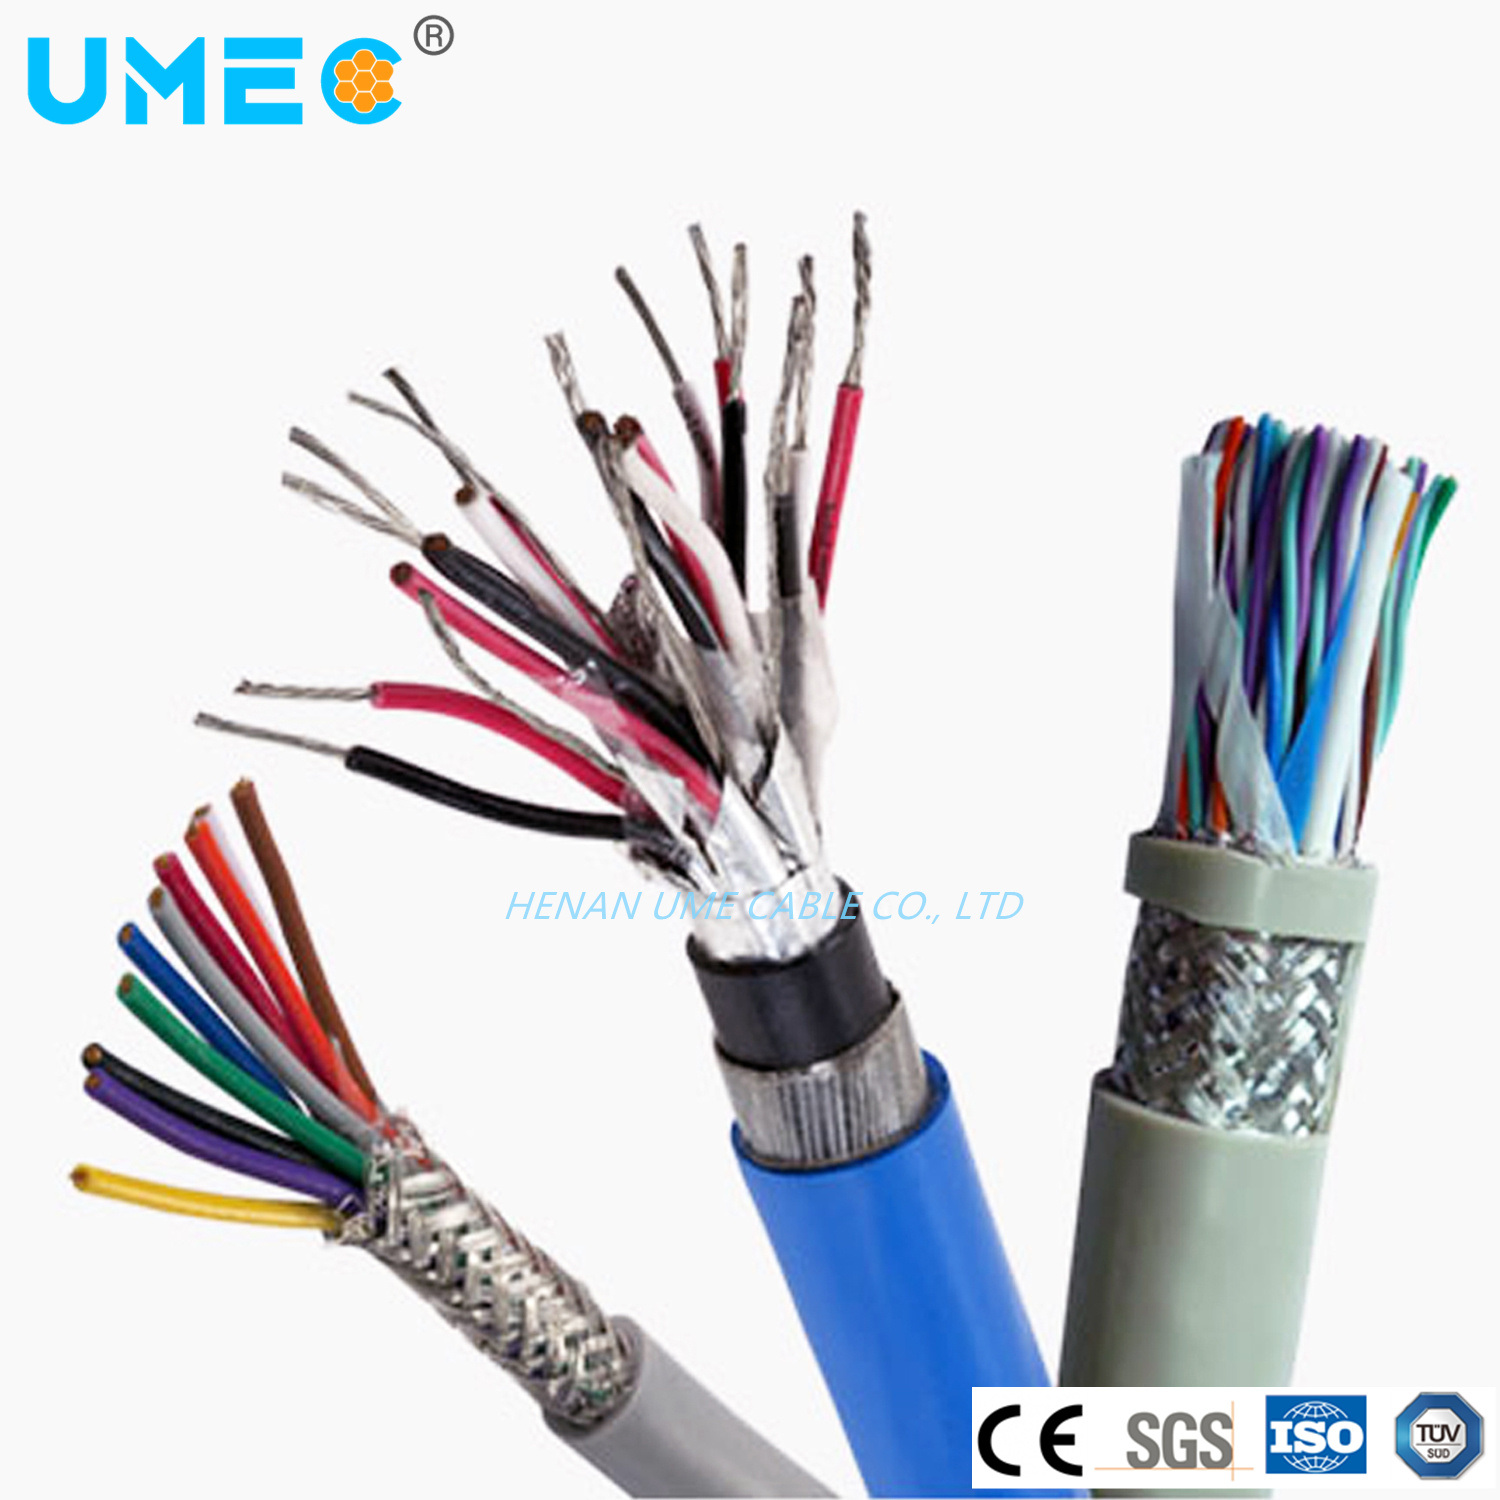 High Quality Wholesales Shielded Cable for Computers Individual Braided Shielding Soft Computer Cable